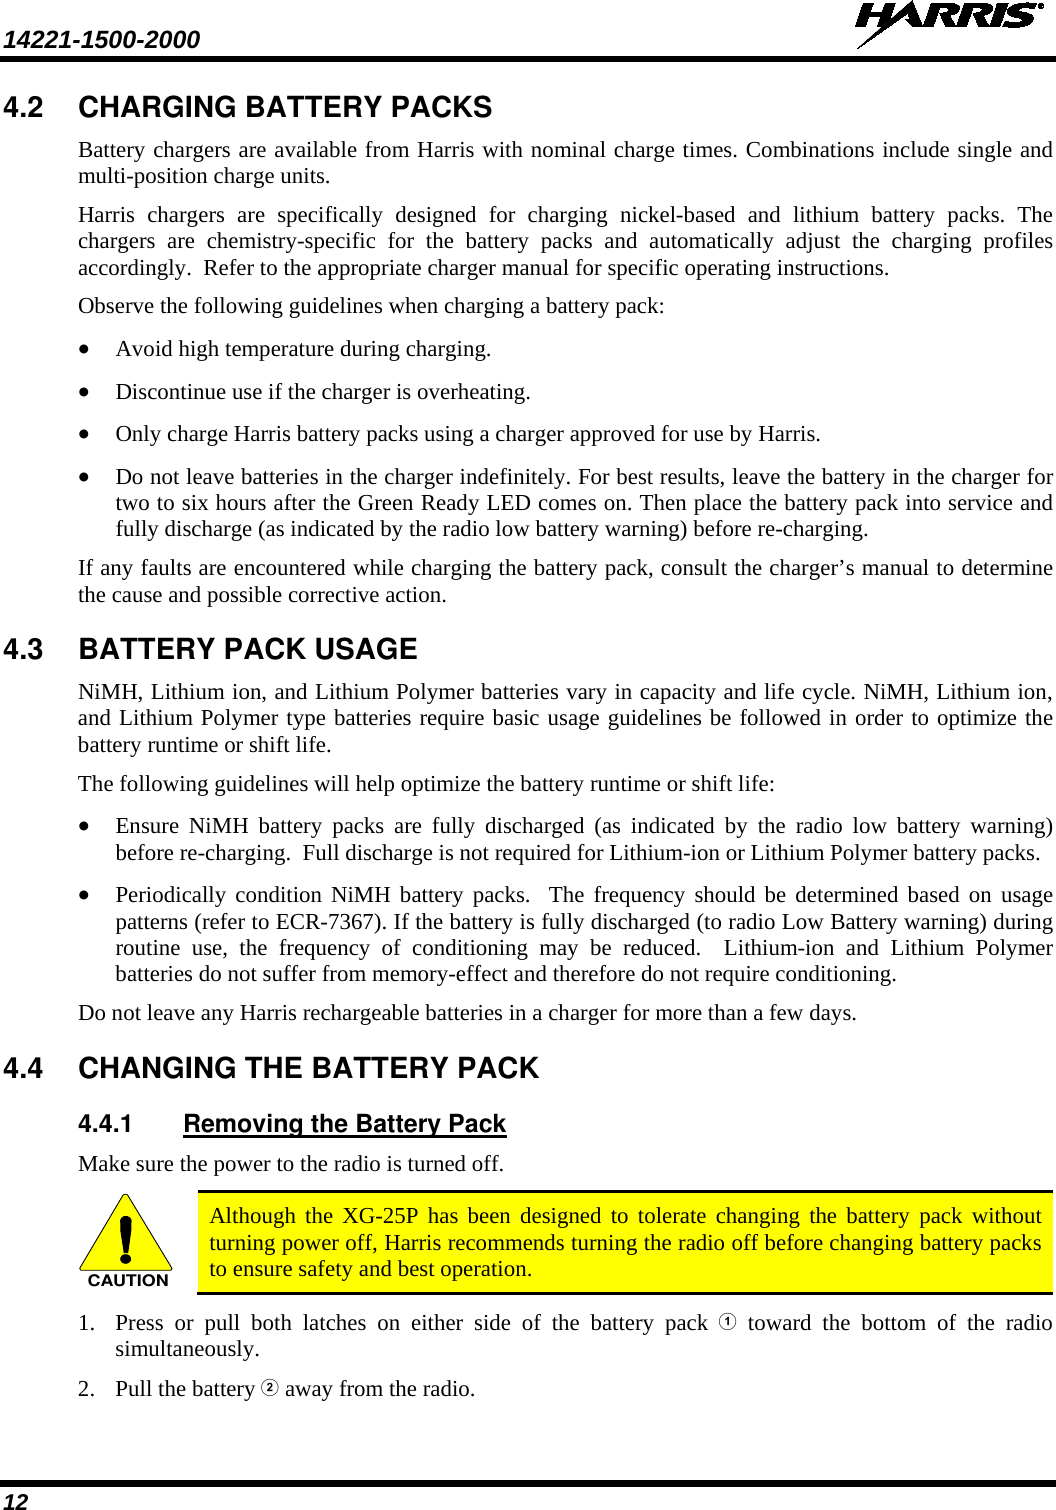 14221-1500-2000   12 4.2 CHARGING BATTERY PACKS Battery chargers are available from Harris with nominal charge times. Combinations include single and multi-position charge units.  Harris chargers are specifically designed for charging nickel-based and lithium battery packs. The chargers are chemistry-specific for the battery packs and automatically adjust the charging profiles accordingly.  Refer to the appropriate charger manual for specific operating instructions.  Observe the following guidelines when charging a battery pack: • Avoid high temperature during charging.  • Discontinue use if the charger is overheating. • Only charge Harris battery packs using a charger approved for use by Harris. • Do not leave batteries in the charger indefinitely. For best results, leave the battery in the charger for two to six hours after the Green Ready LED comes on. Then place the battery pack into service and fully discharge (as indicated by the radio low battery warning) before re-charging. If any faults are encountered while charging the battery pack, consult the charger’s manual to determine the cause and possible corrective action. 4.3 BATTERY PACK USAGE NiMH, Lithium ion, and Lithium Polymer batteries vary in capacity and life cycle. NiMH, Lithium ion, and Lithium Polymer type batteries require basic usage guidelines be followed in order to optimize the battery runtime or shift life. The following guidelines will help optimize the battery runtime or shift life: • Ensure  NiMH battery packs are fully discharged (as indicated by the radio low battery warning) before re-charging.  Full discharge is not required for Lithium-ion or Lithium Polymer battery packs. • Periodically condition NiMH  battery packs.  The frequency should be determined based on usage patterns (refer to ECR-7367). If the battery is fully discharged (to radio Low Battery warning) during routine use, the frequency of conditioning may be reduced.  Lithium-ion  and Lithium Polymer batteries do not suffer from memory-effect and therefore do not require conditioning. Do not leave any Harris rechargeable batteries in a charger for more than a few days.  4.4 CHANGING THE BATTERY PACK 4.4.1 Removing the Battery Pack Make sure the power to the radio is turned off. CAUTION Although the XG-25P has been designed to tolerate changing the battery pack without turning power off, Harris recommends turning the radio off before changing battery packs to ensure safety and best operation. 1. Press or pull both latches on either side of the battery pack  toward the bottom of the radio simultaneously.  2. Pull the battery  away from the radio. 